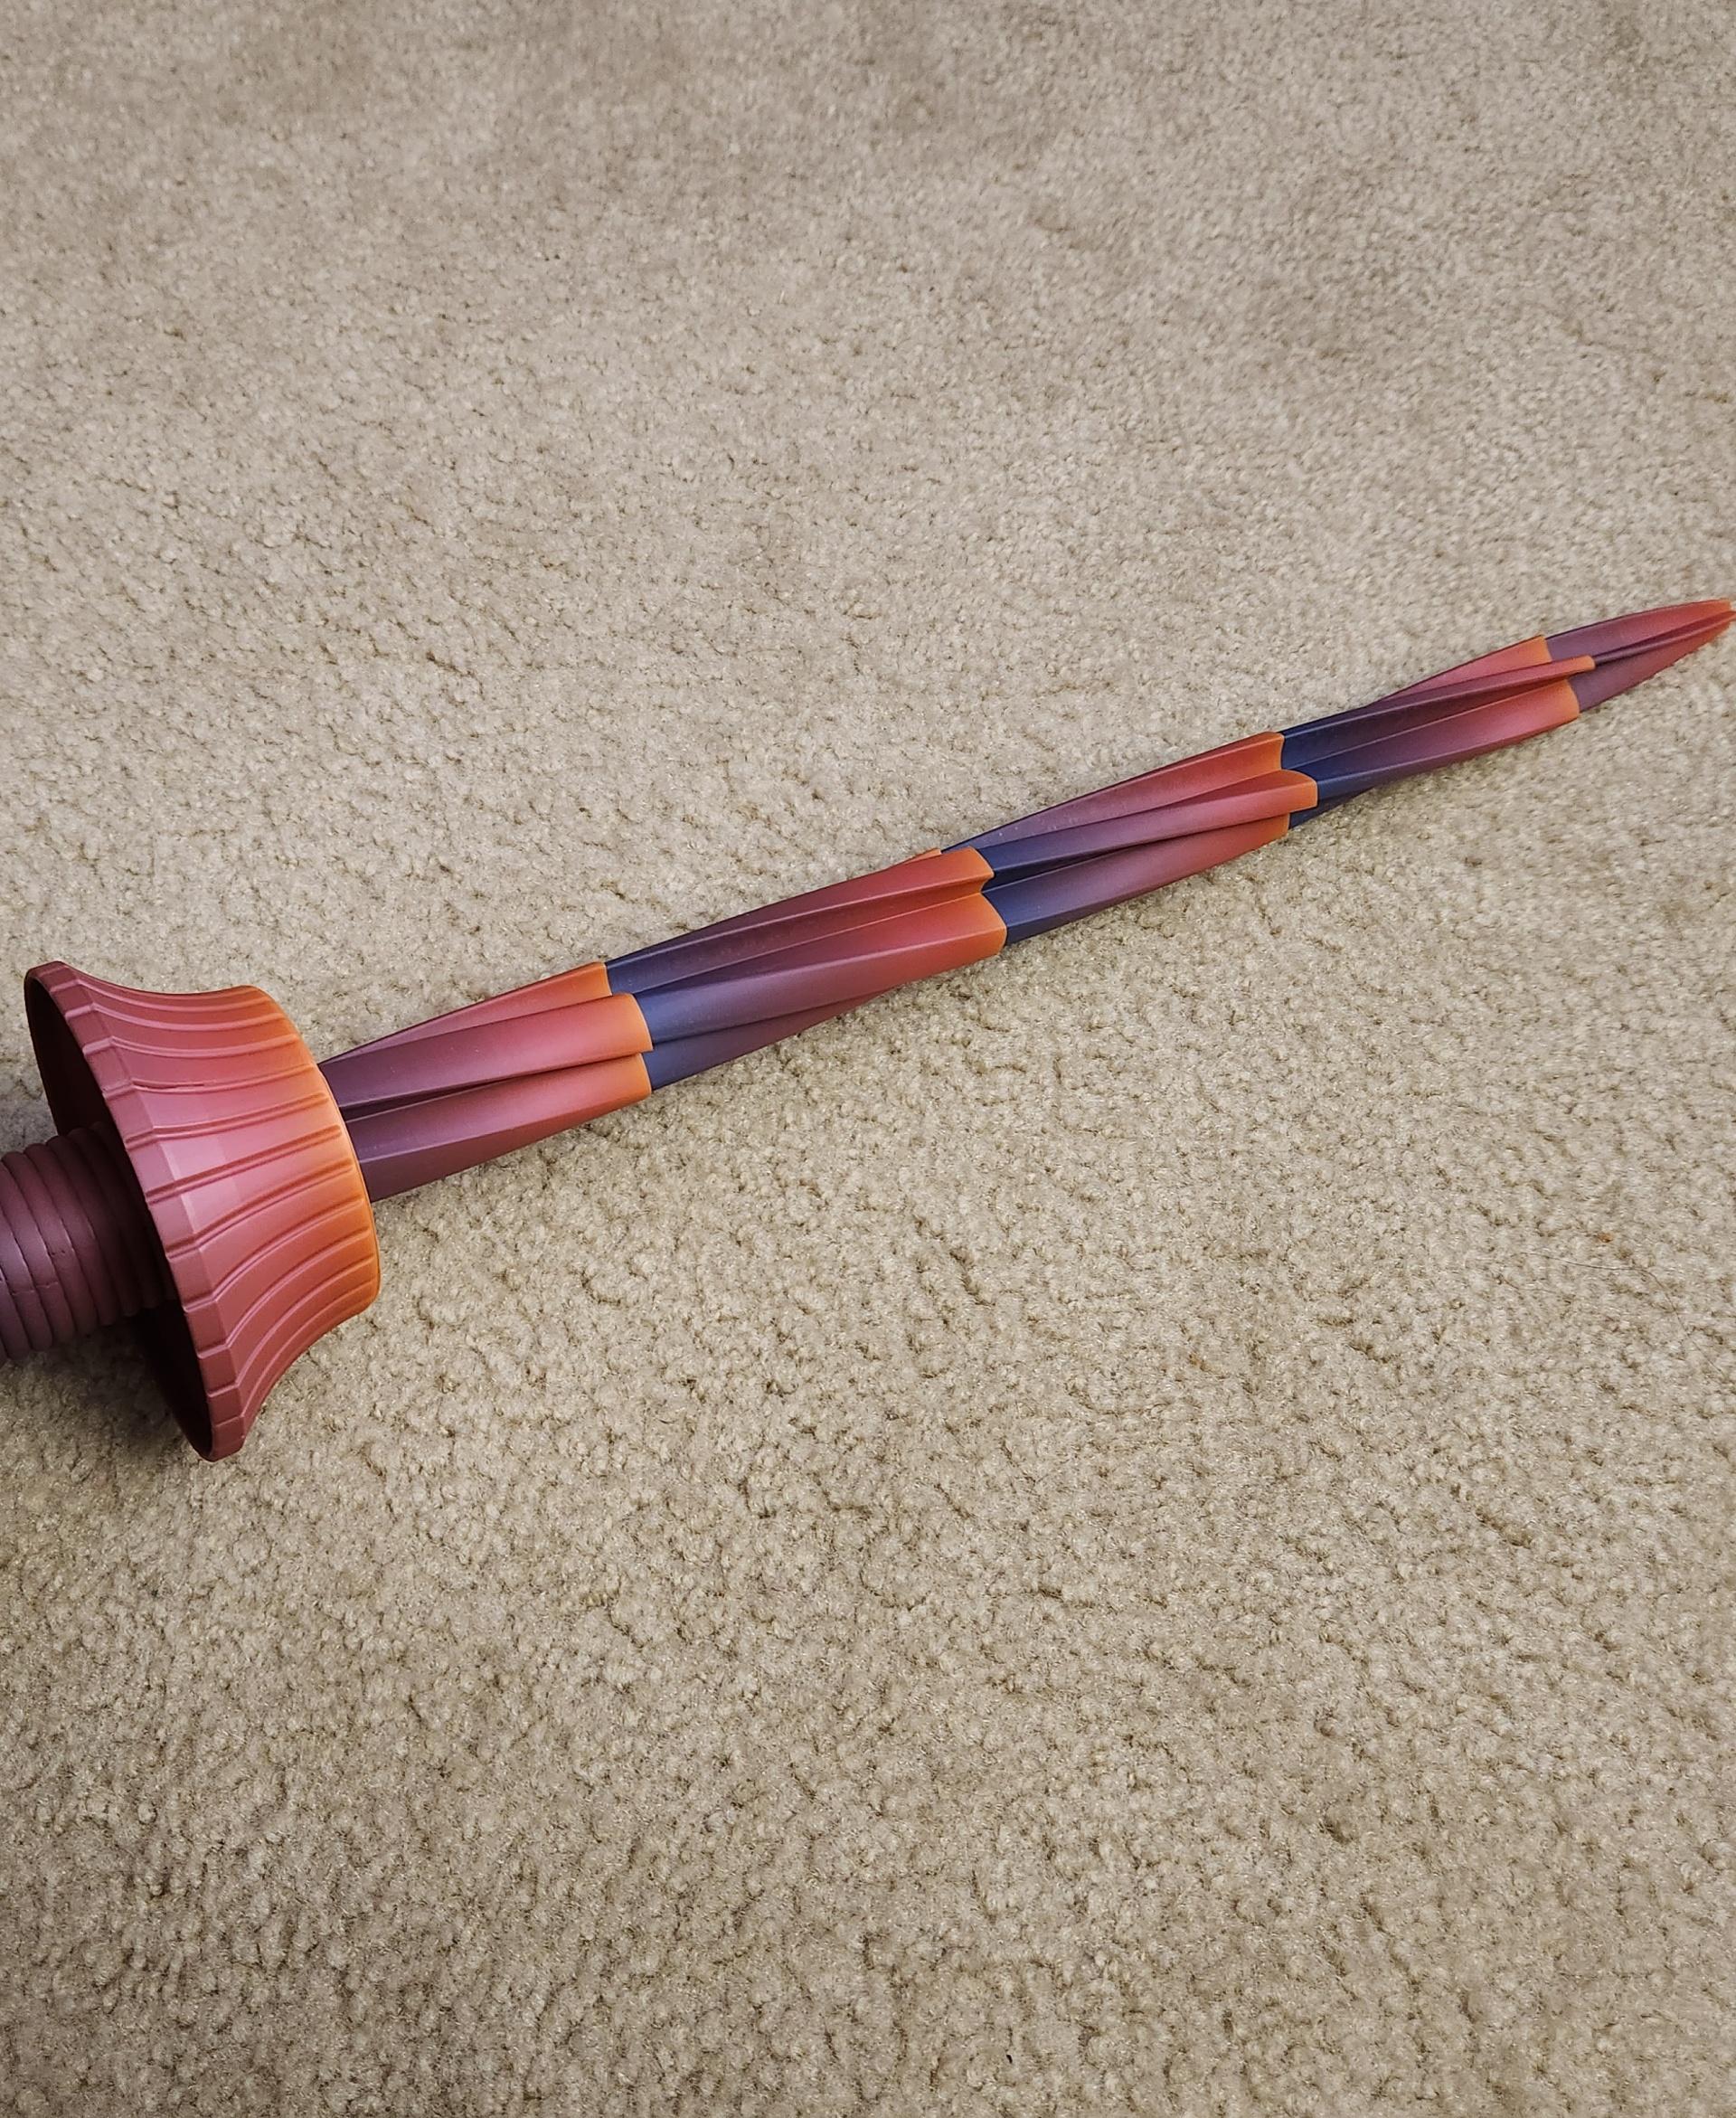 Collapsing Drill Sword Print-in-Place - Creality rainbow filament on Bambu Lab X1C - 3d model